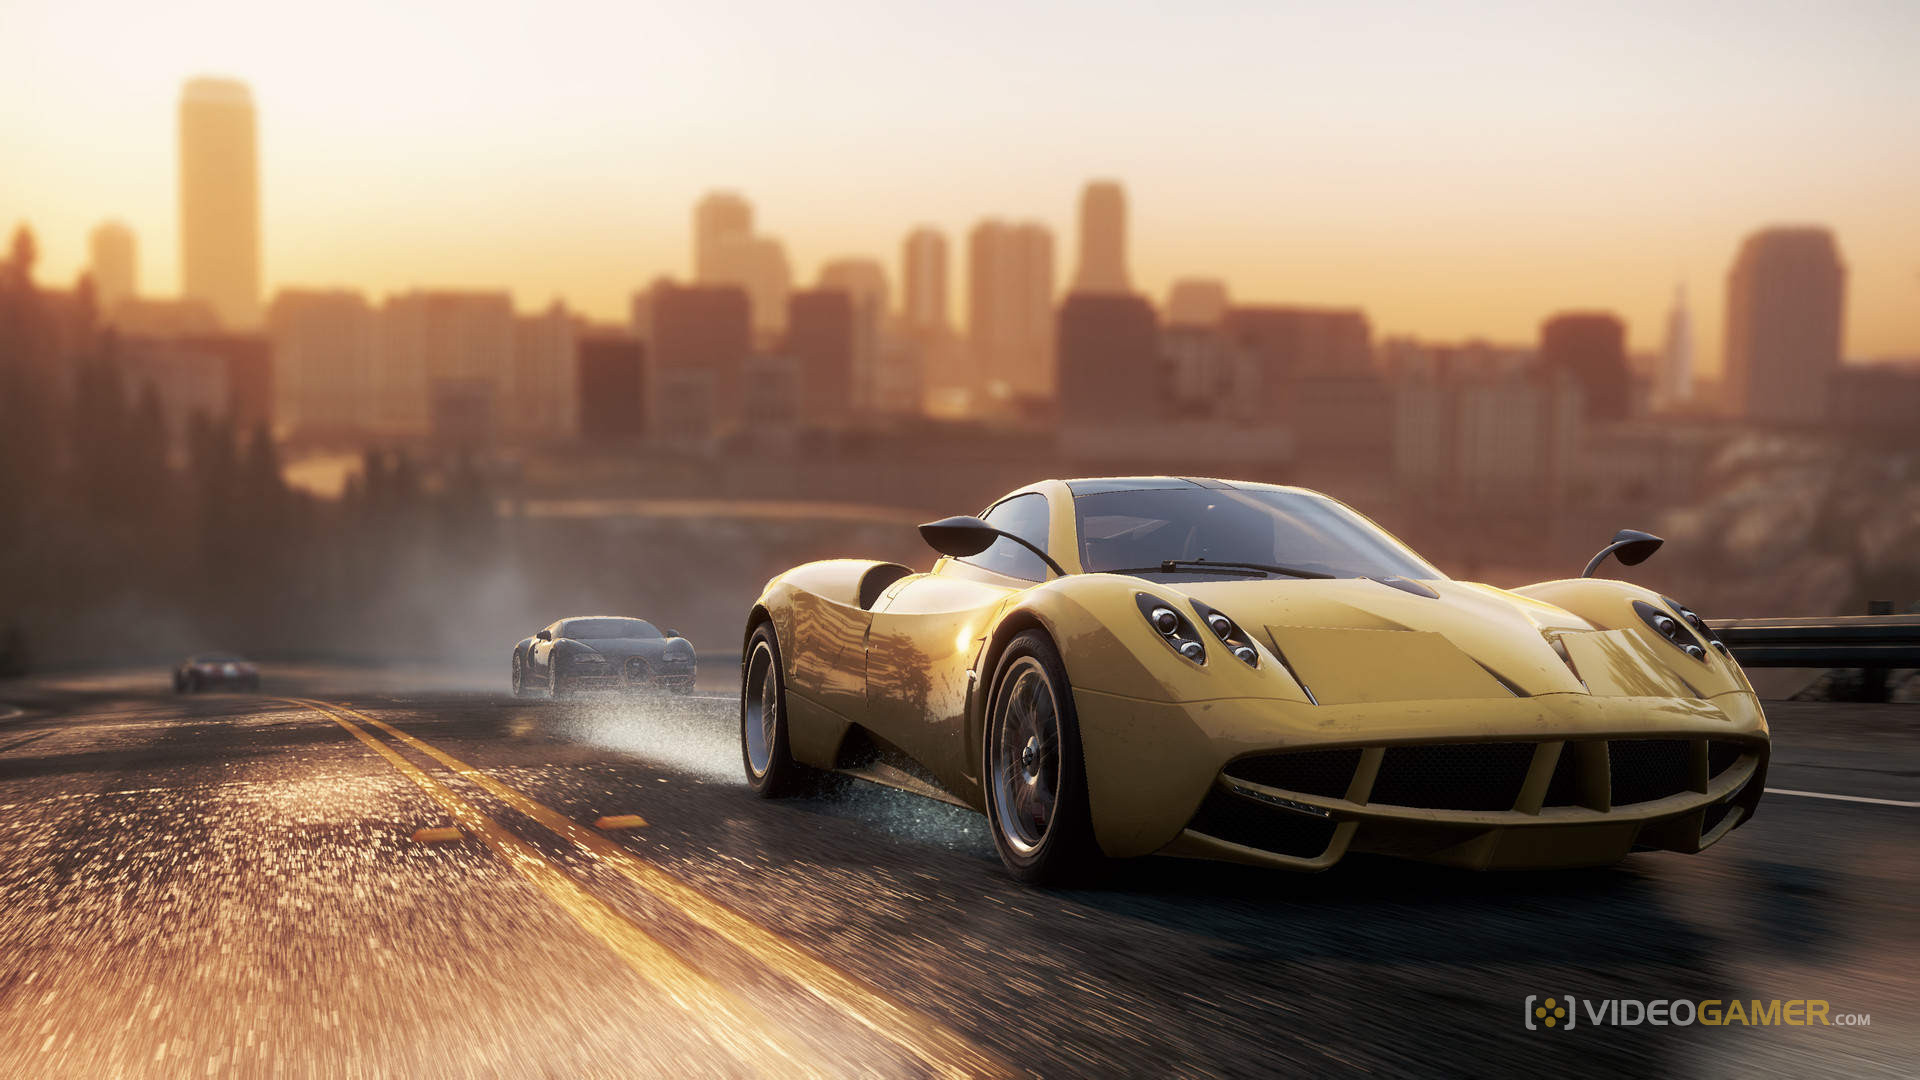 Wallpaper Pagani, Need for Speed, nfs, To huayr, 2013, Rivals, NFSR, NSF  for mobile and desktop, section игры, resolution 1920x1080 - download